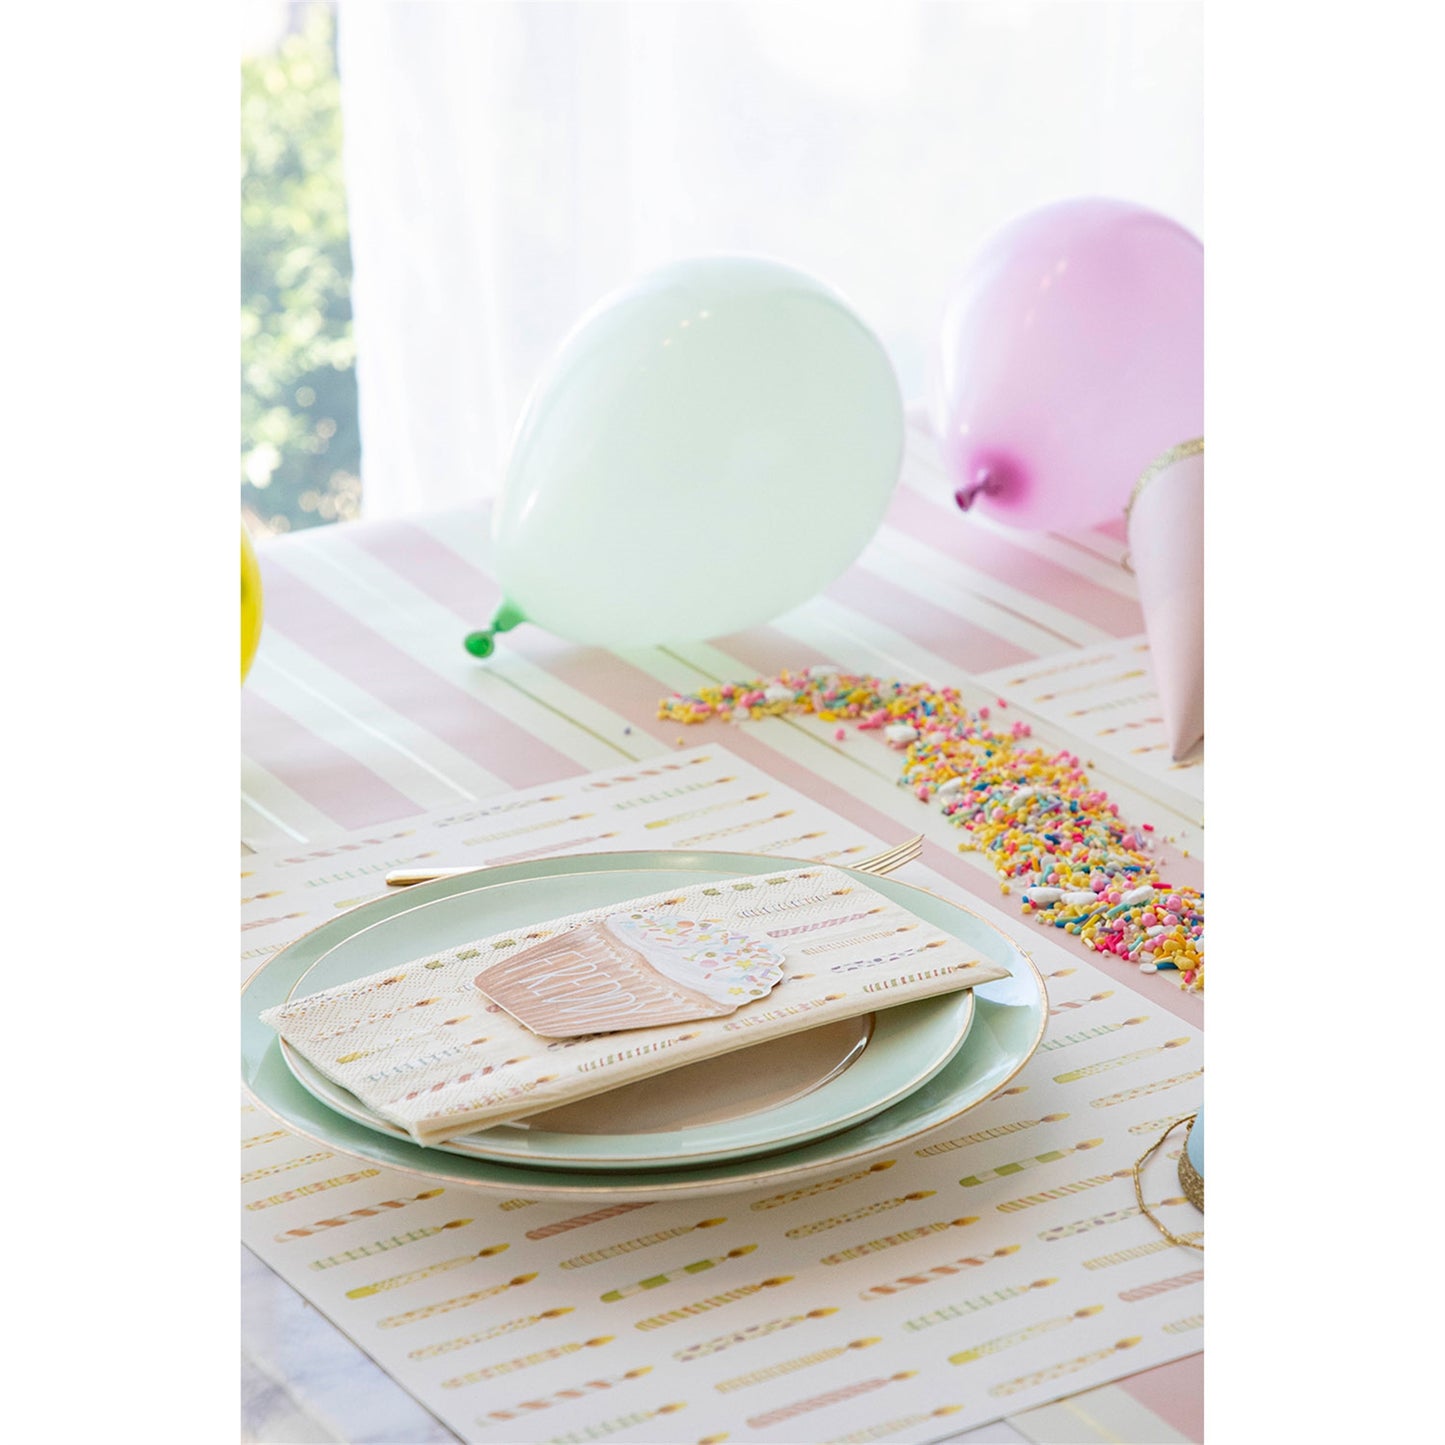 Showing a table setting using the birthday candles paper placemats with balloons and place card and candy.